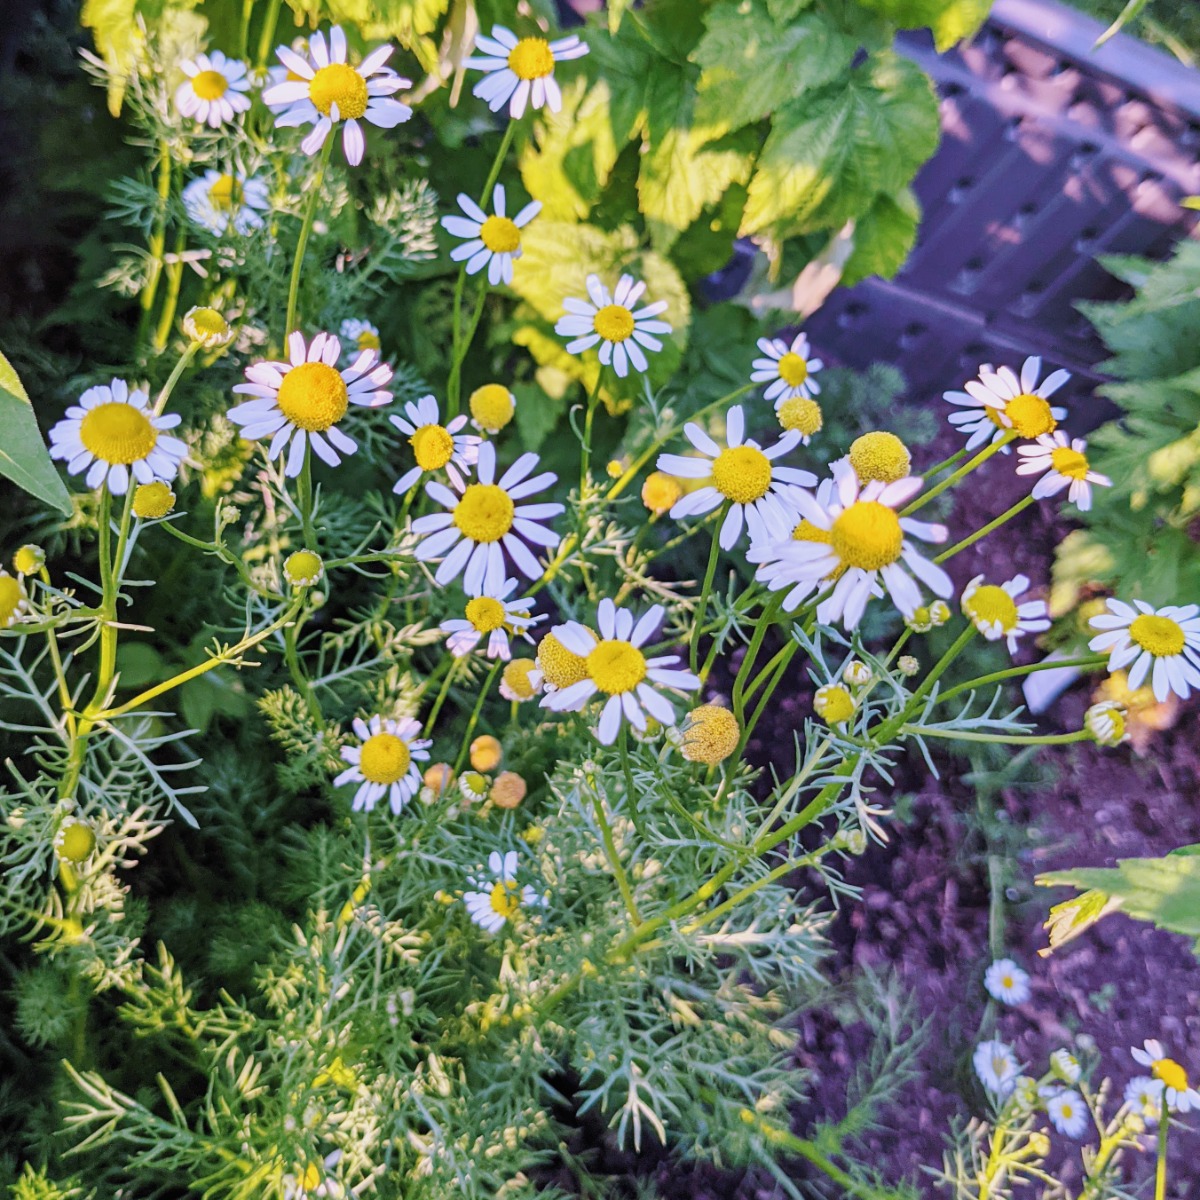 Growing Chamomile next to raspberry plants in a raised garden bed